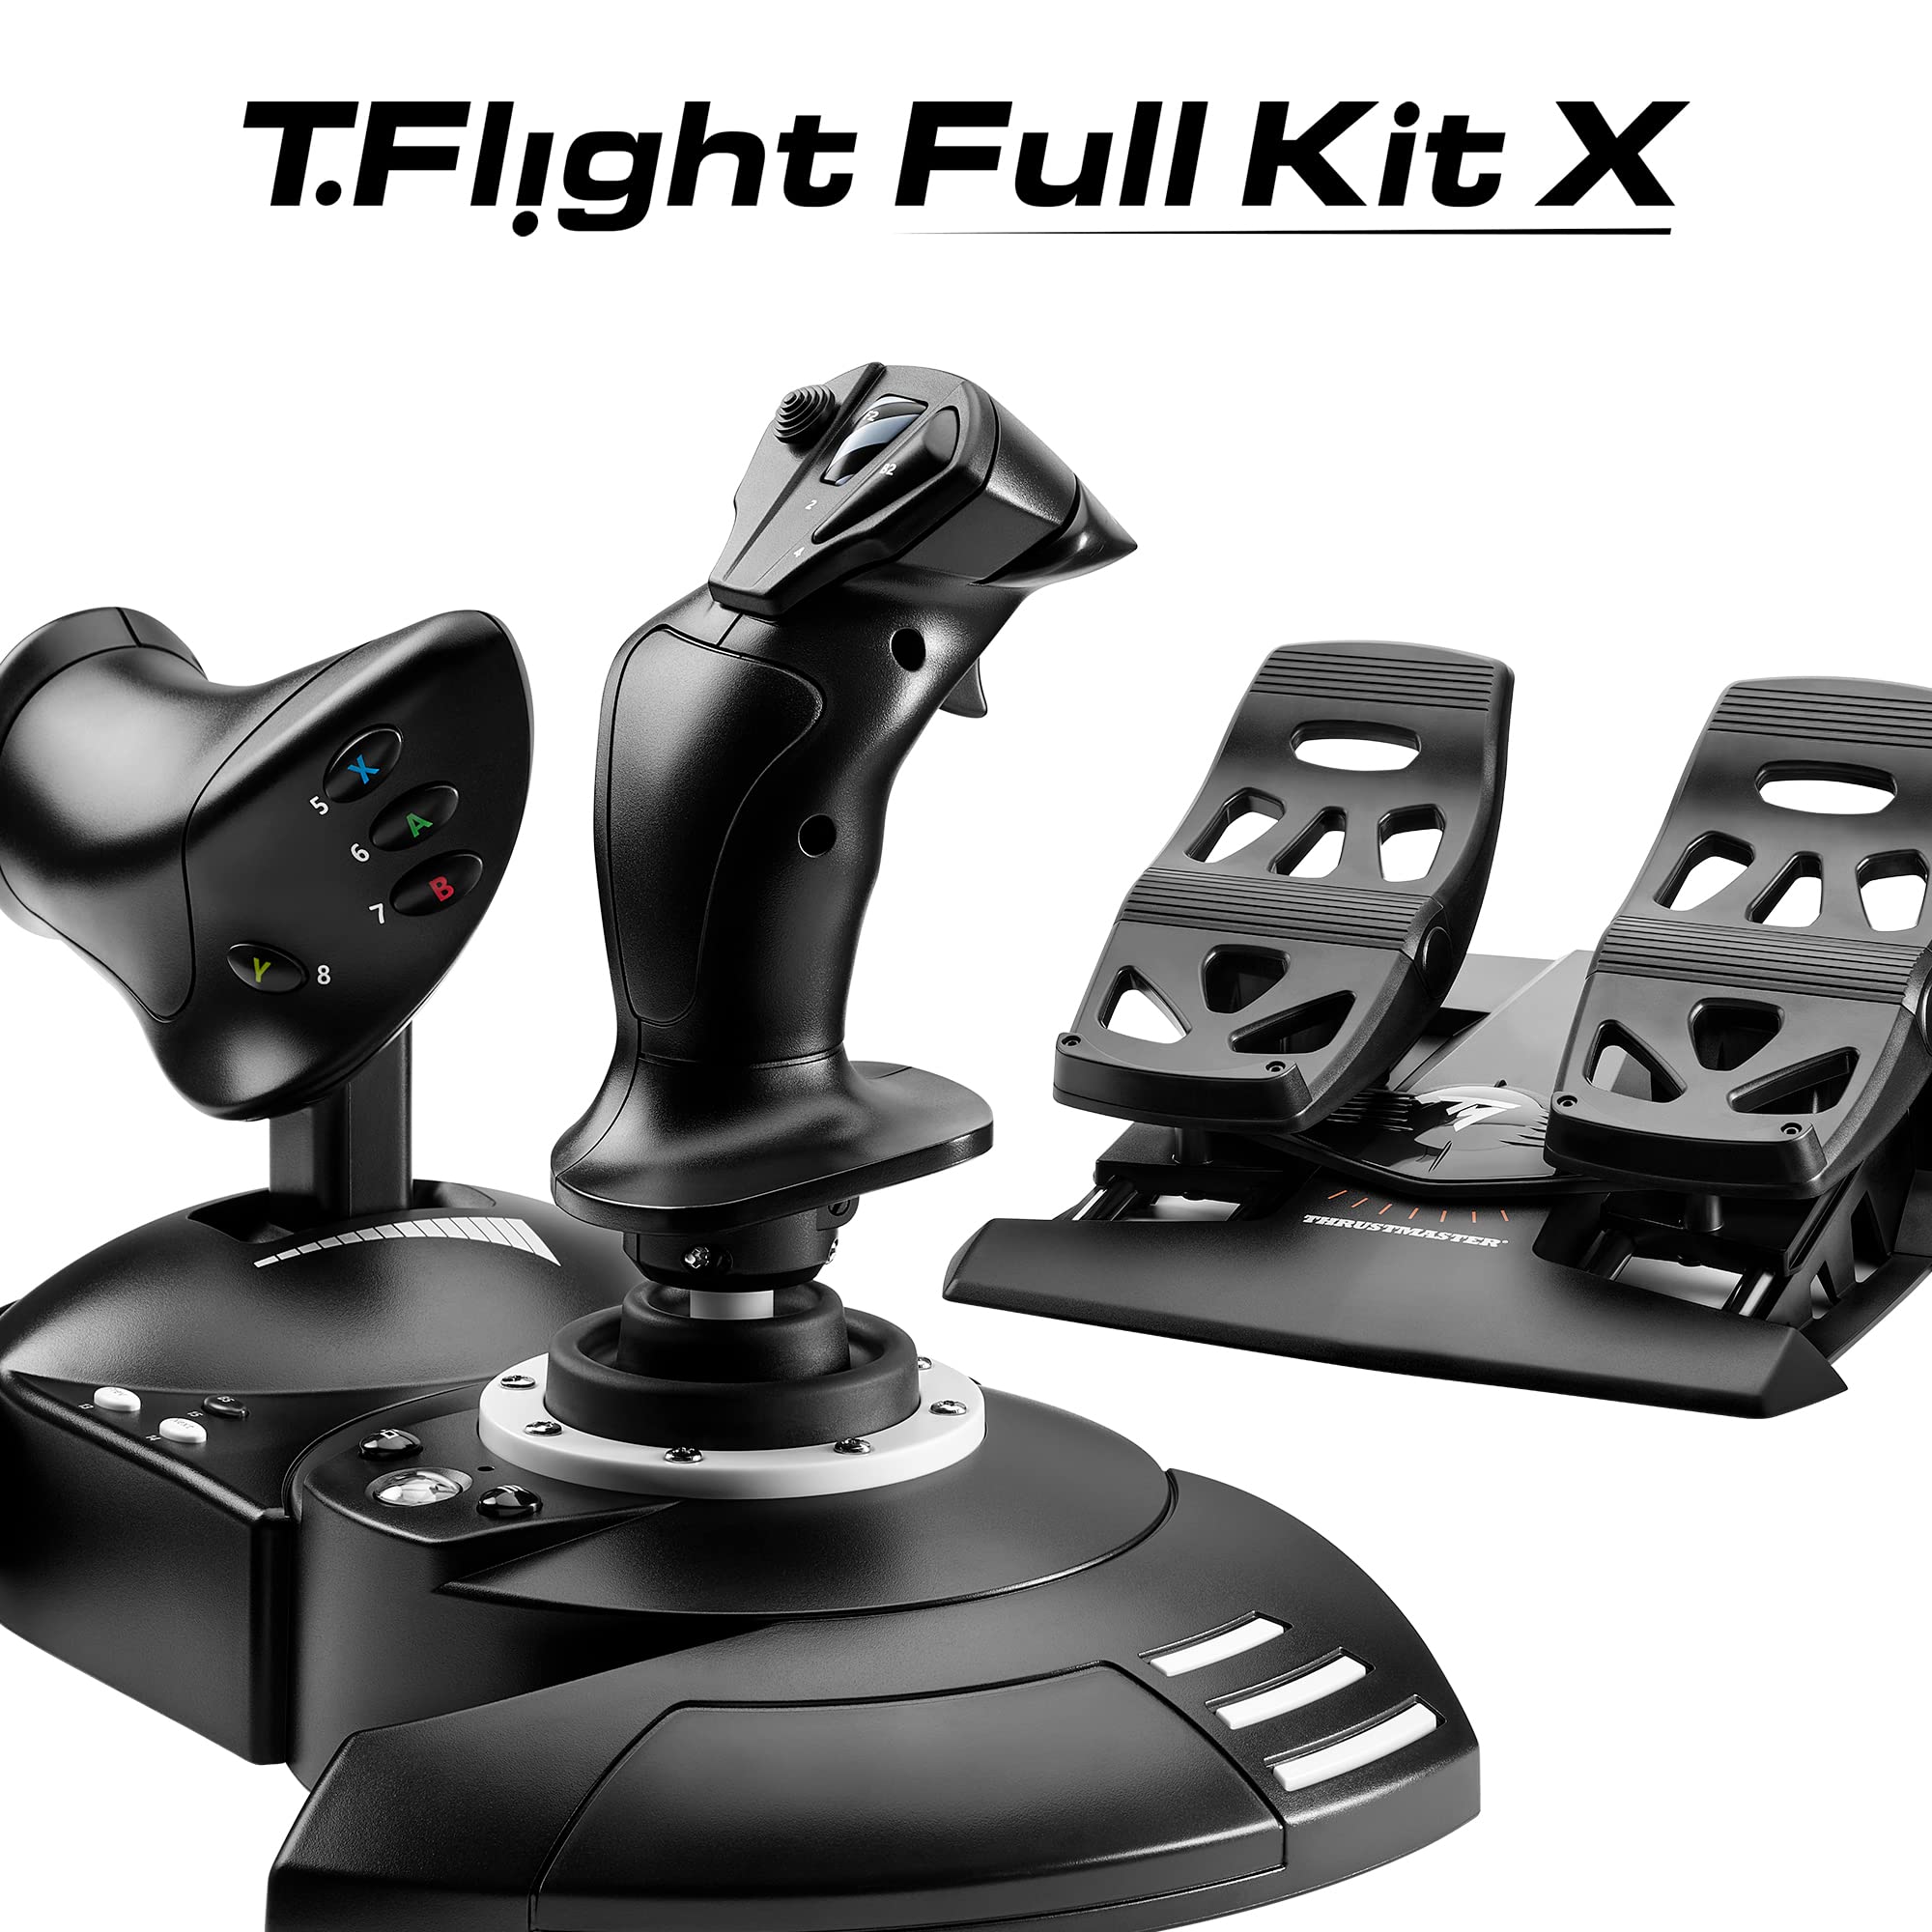 THRUSTMASTER T.Flight Full Kit X - Joystick, Throttle and Rudder Pedals for Xbox Series X|S/Xbox One/PC